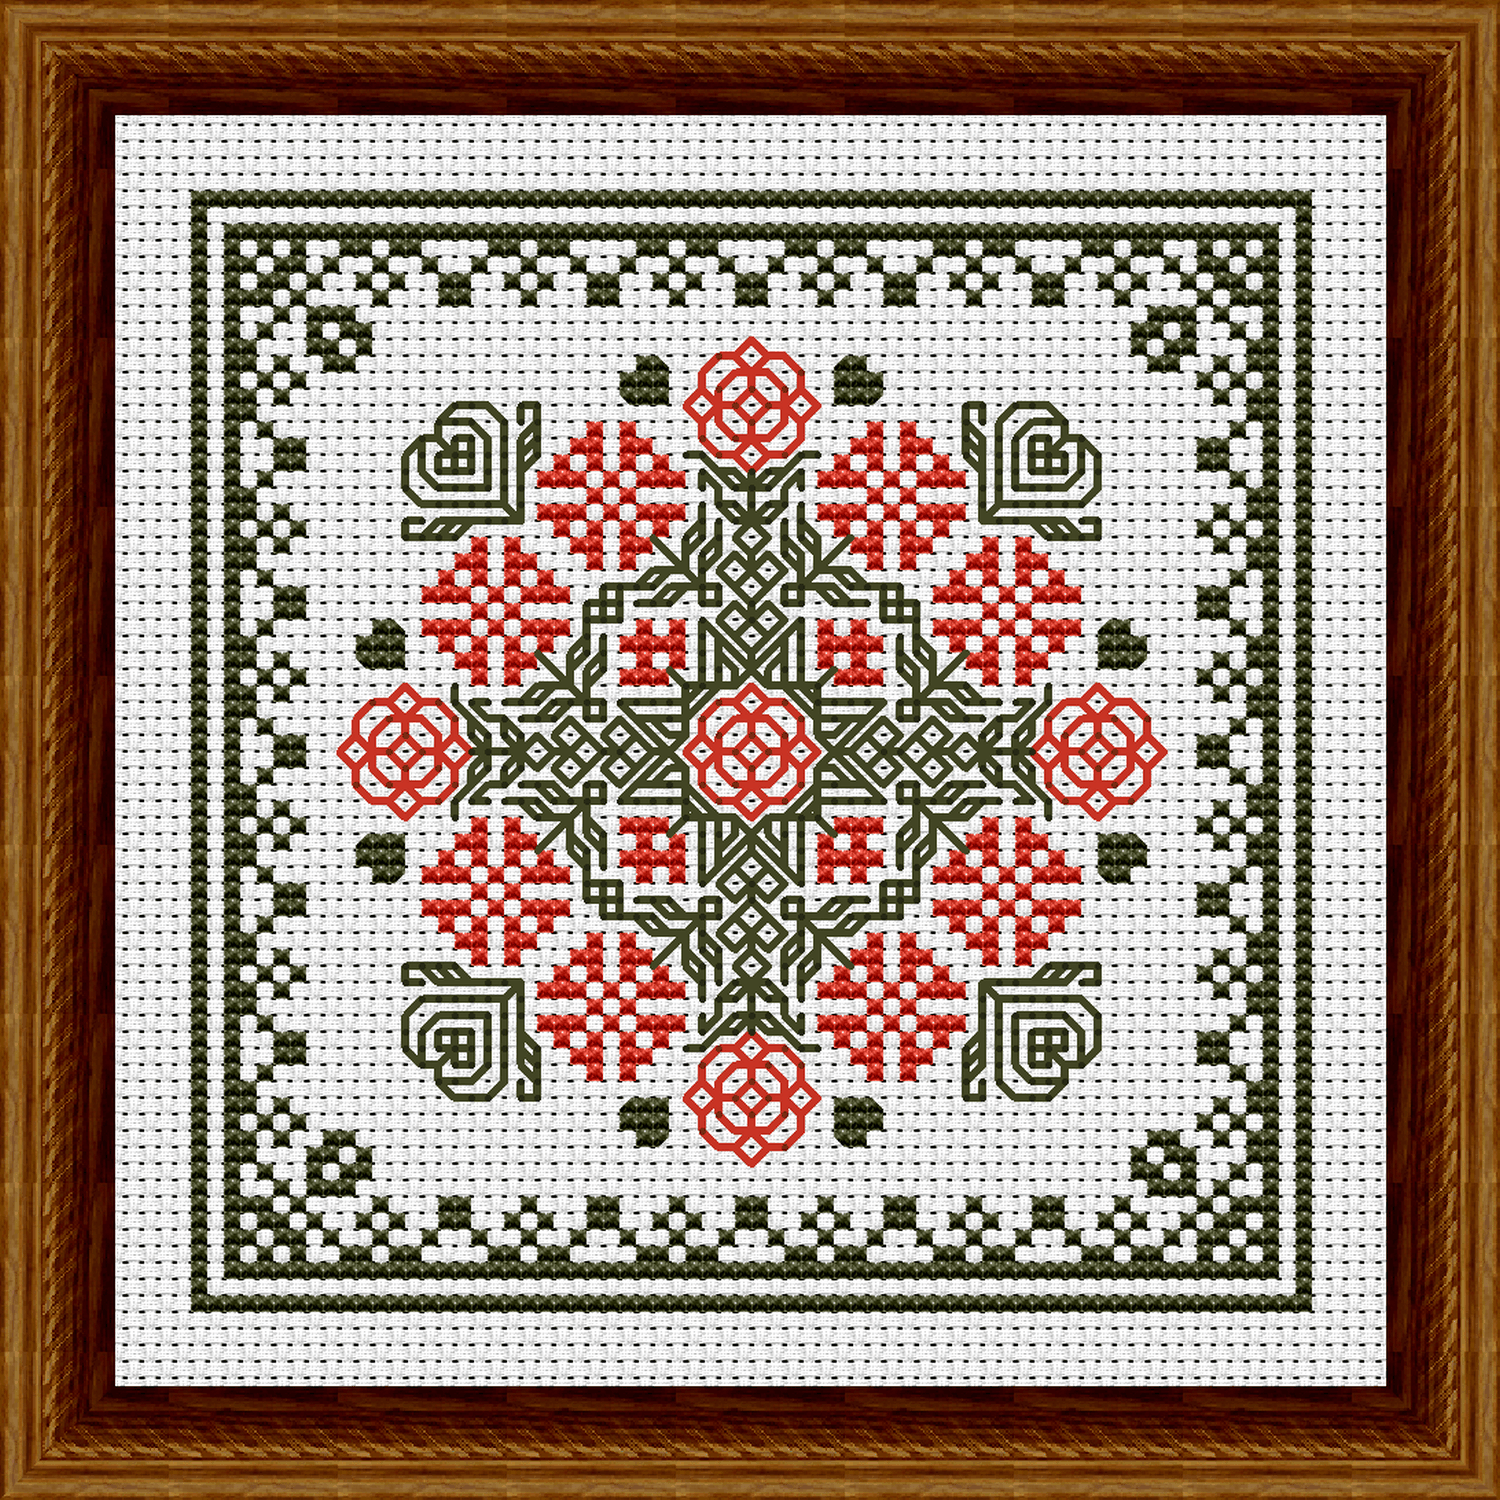 October Hearts Square with Marigolds Cross Stitch Pattern 3509